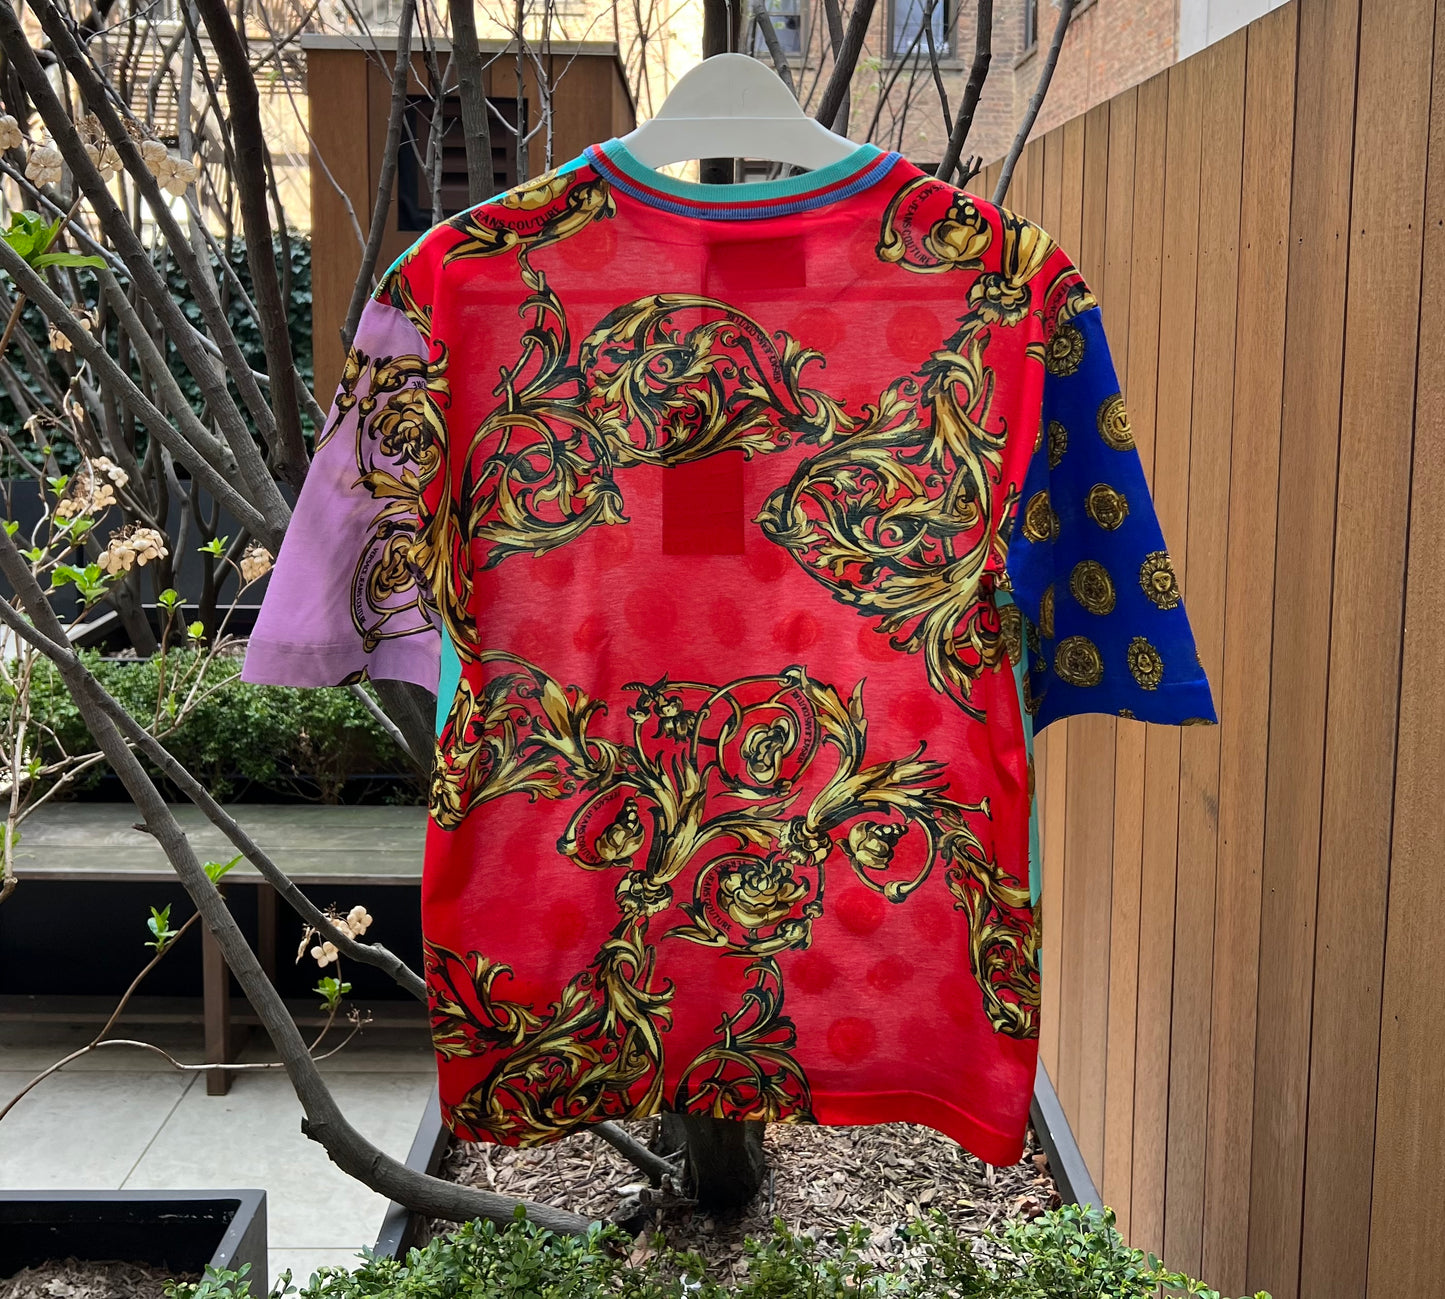 A colorfully patterned VERSACE E72GAH6O9-EJS064-EG12 T-SHIRT displayed outdoors on a clear hanger against a backdrop of plants and wooden fencing.